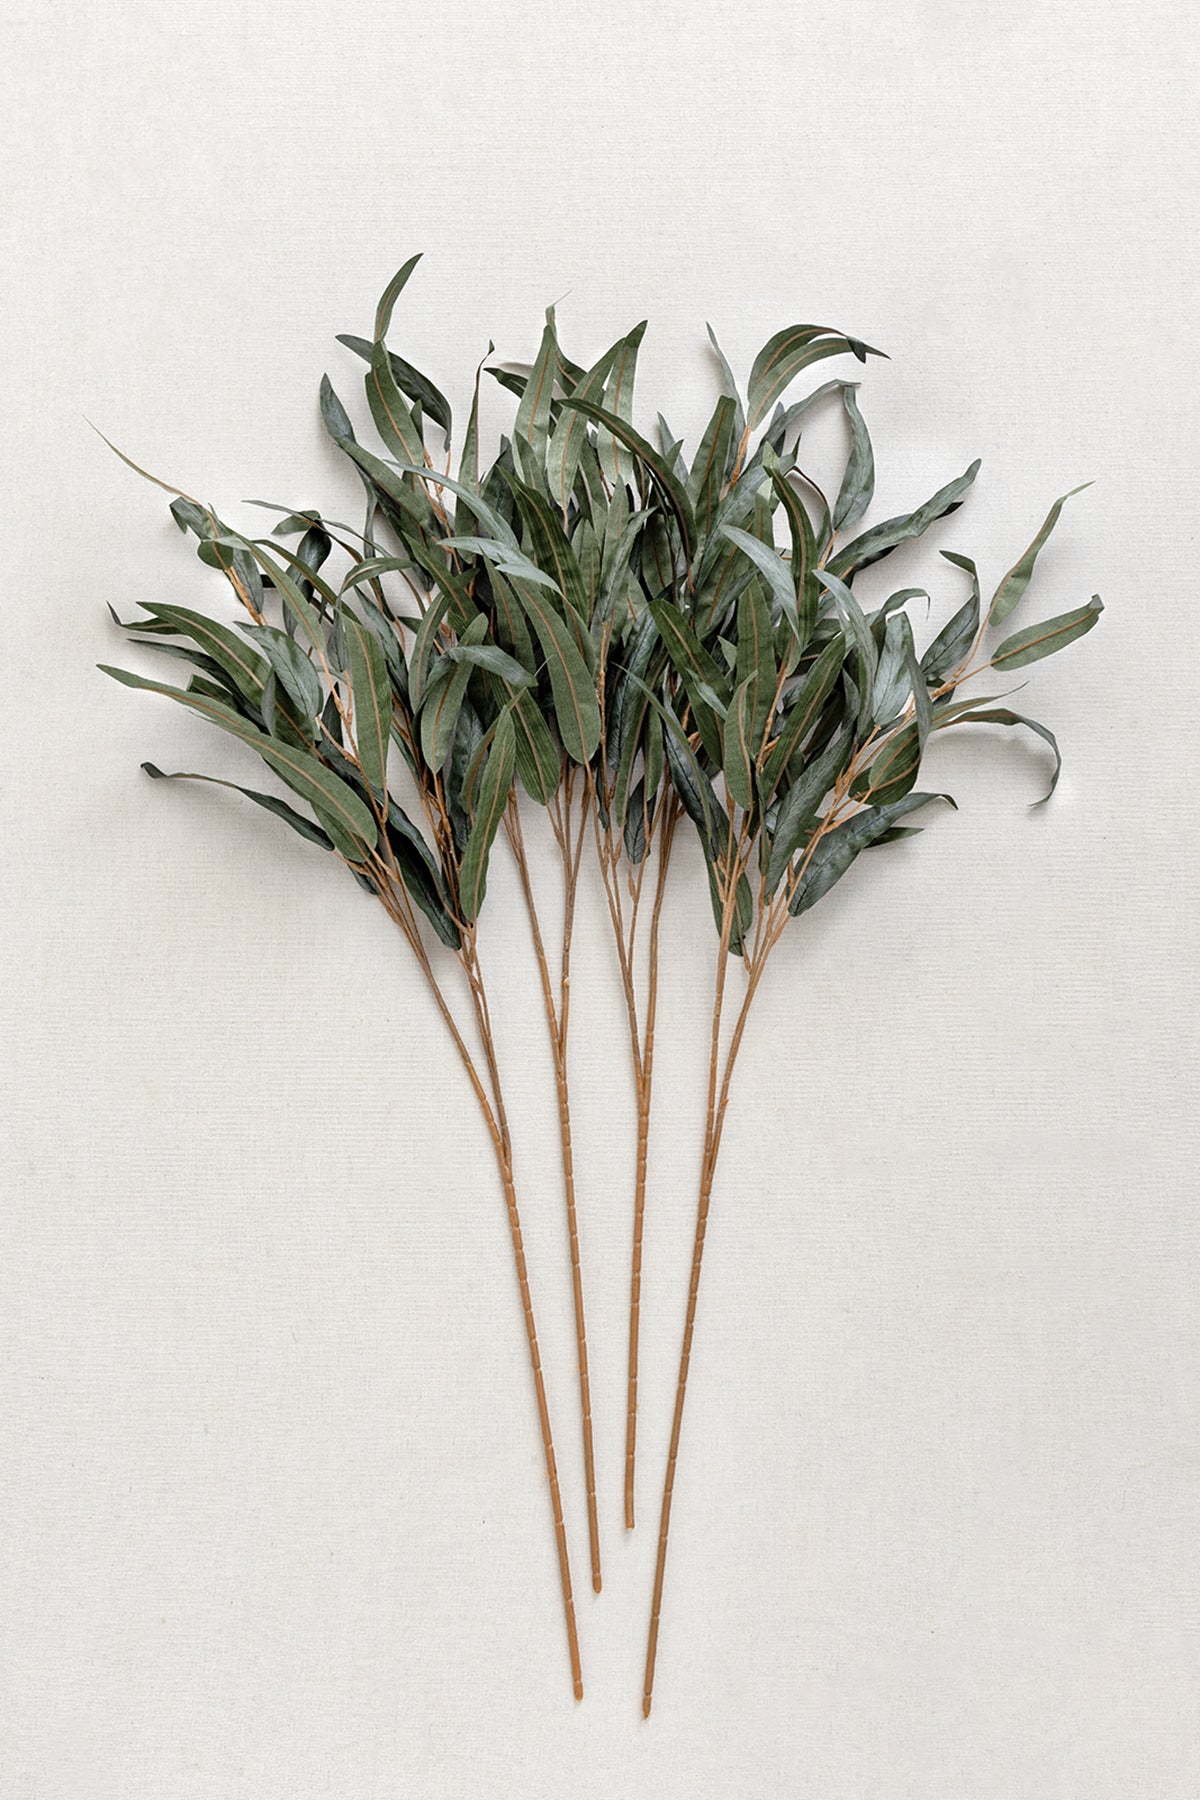 2.9ft Salix Leaves with Stems - 4 Colors